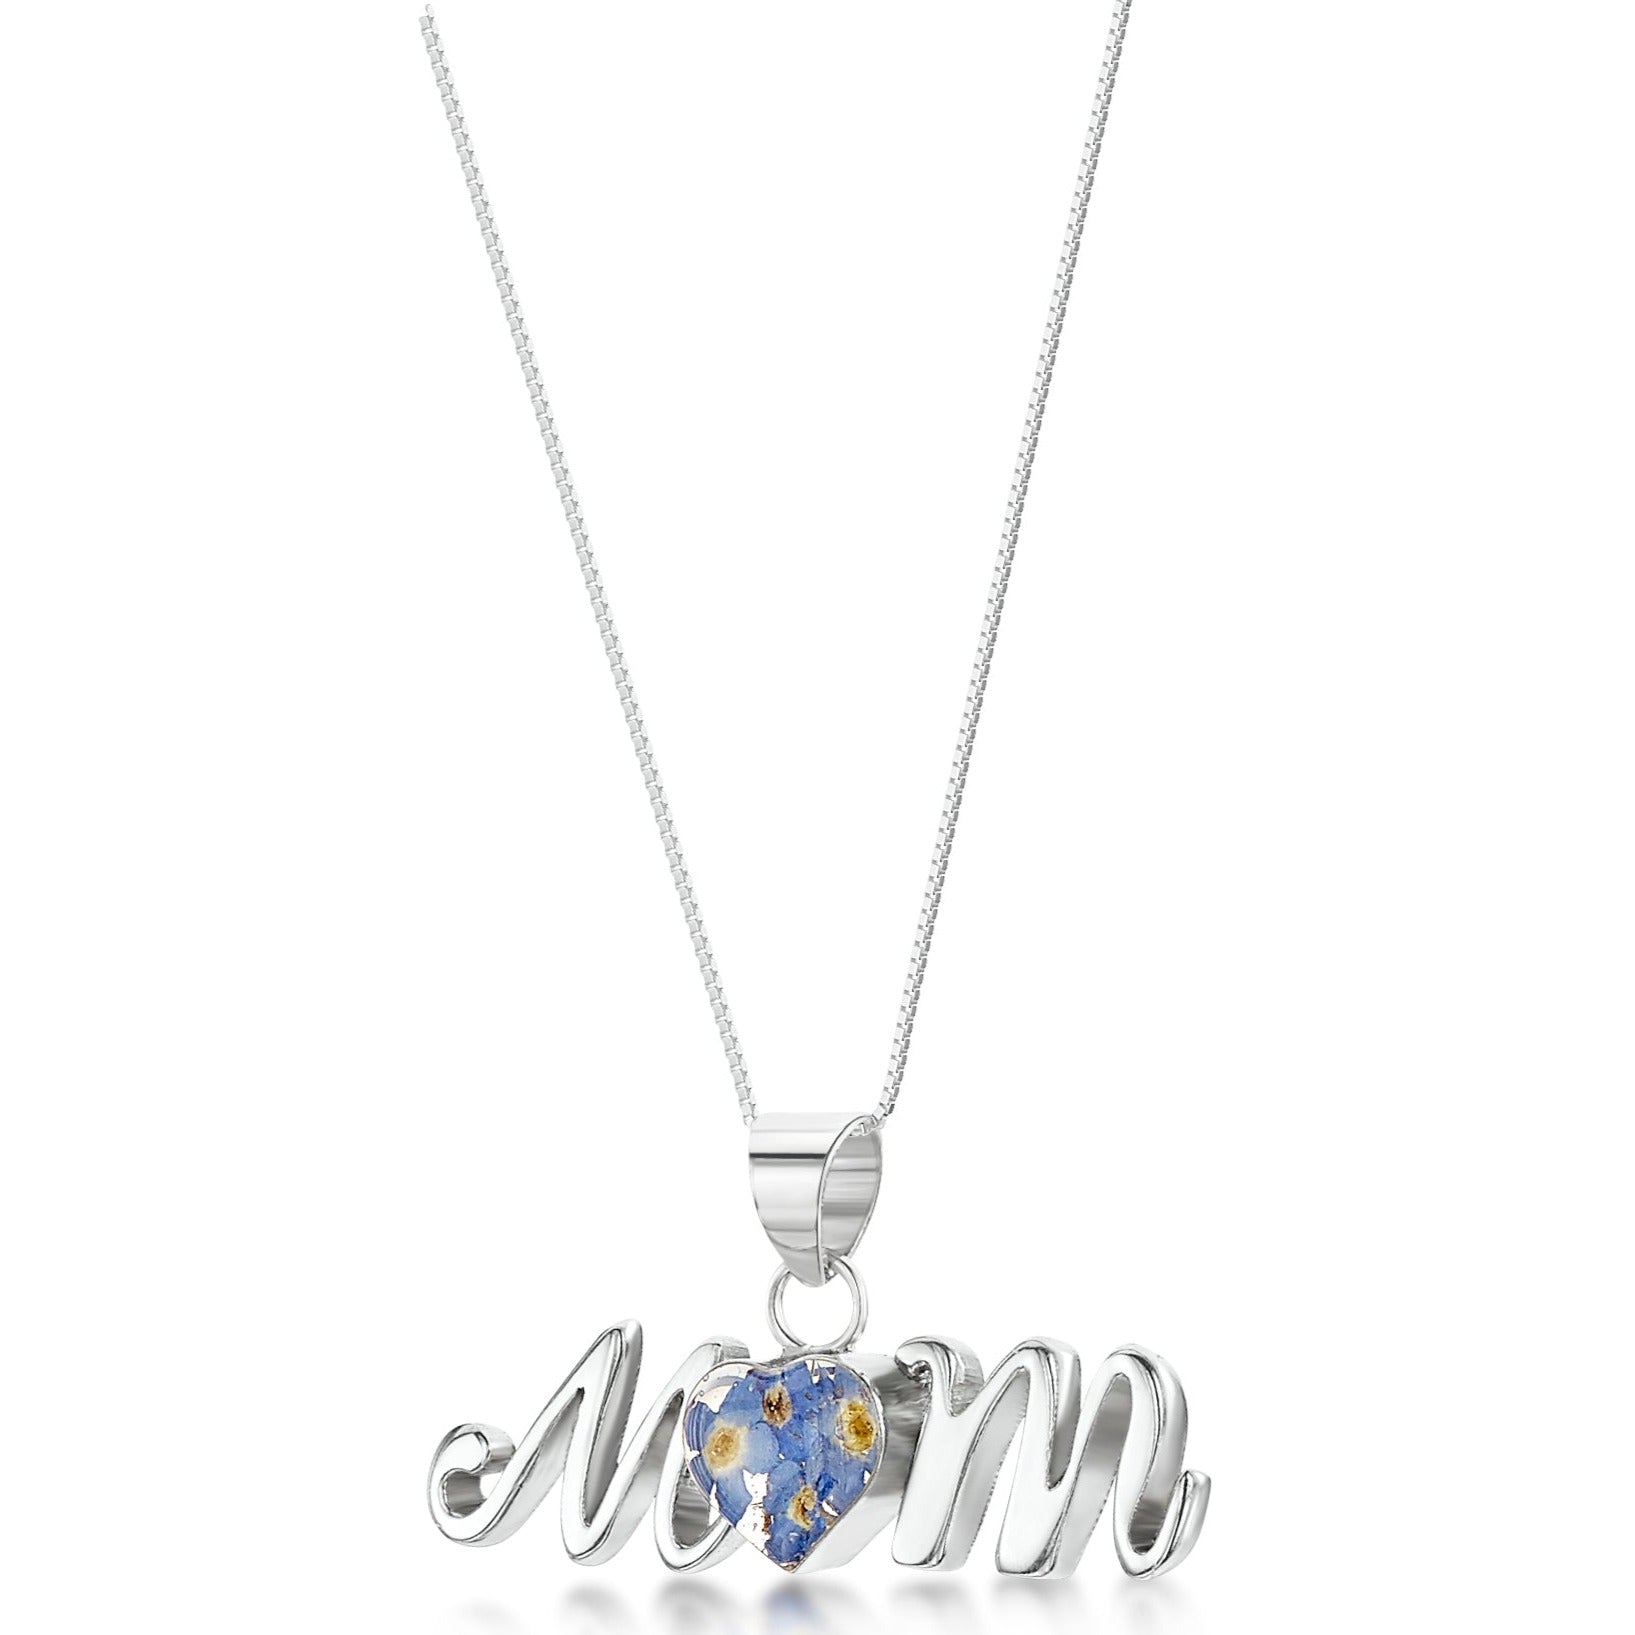 Sterling silver Mum pendant with the letter U formed by a silver heart with real forget-me-not flowers set in resin. Hangs on an 18 inch sterling silver chain.